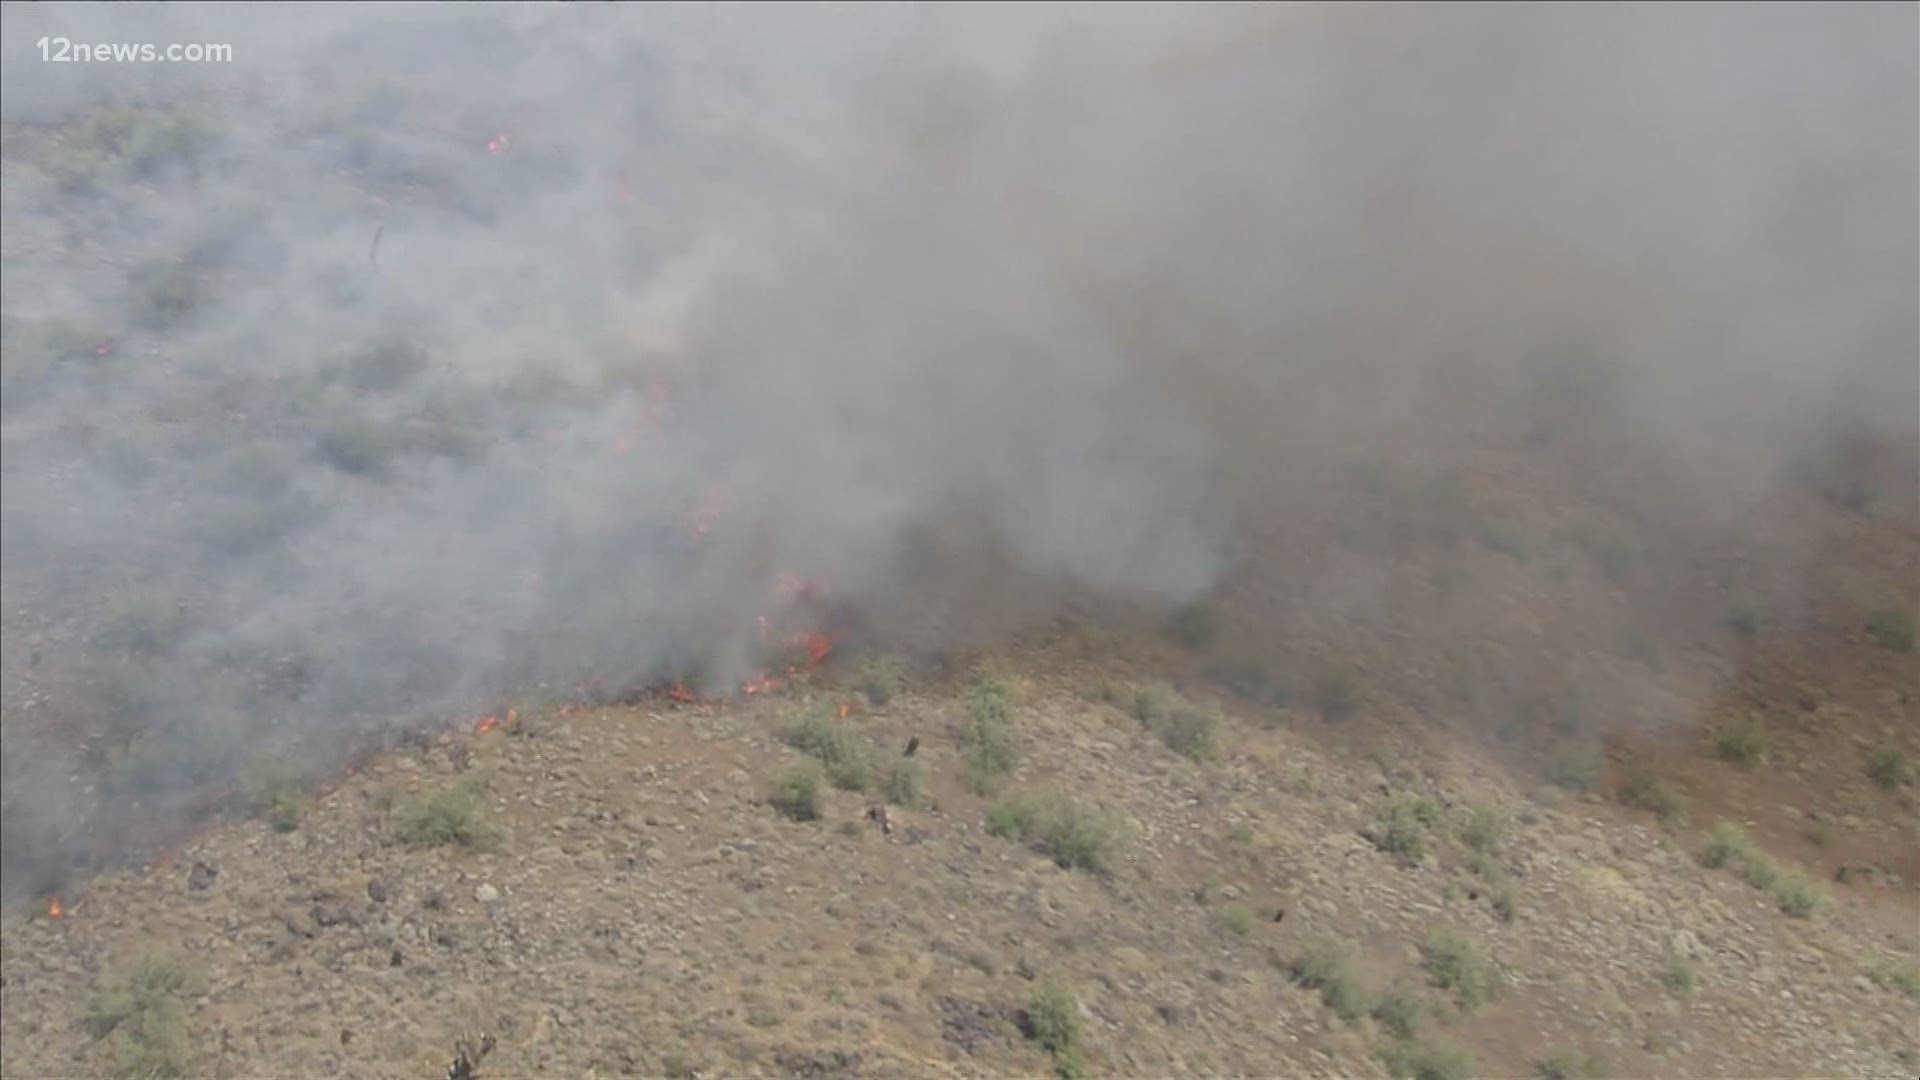 Phoenix and Daisy Mountain Firefighters are on scene of a brush fire located south of the federal prison, north of Carefree Highway and west of the I-17.